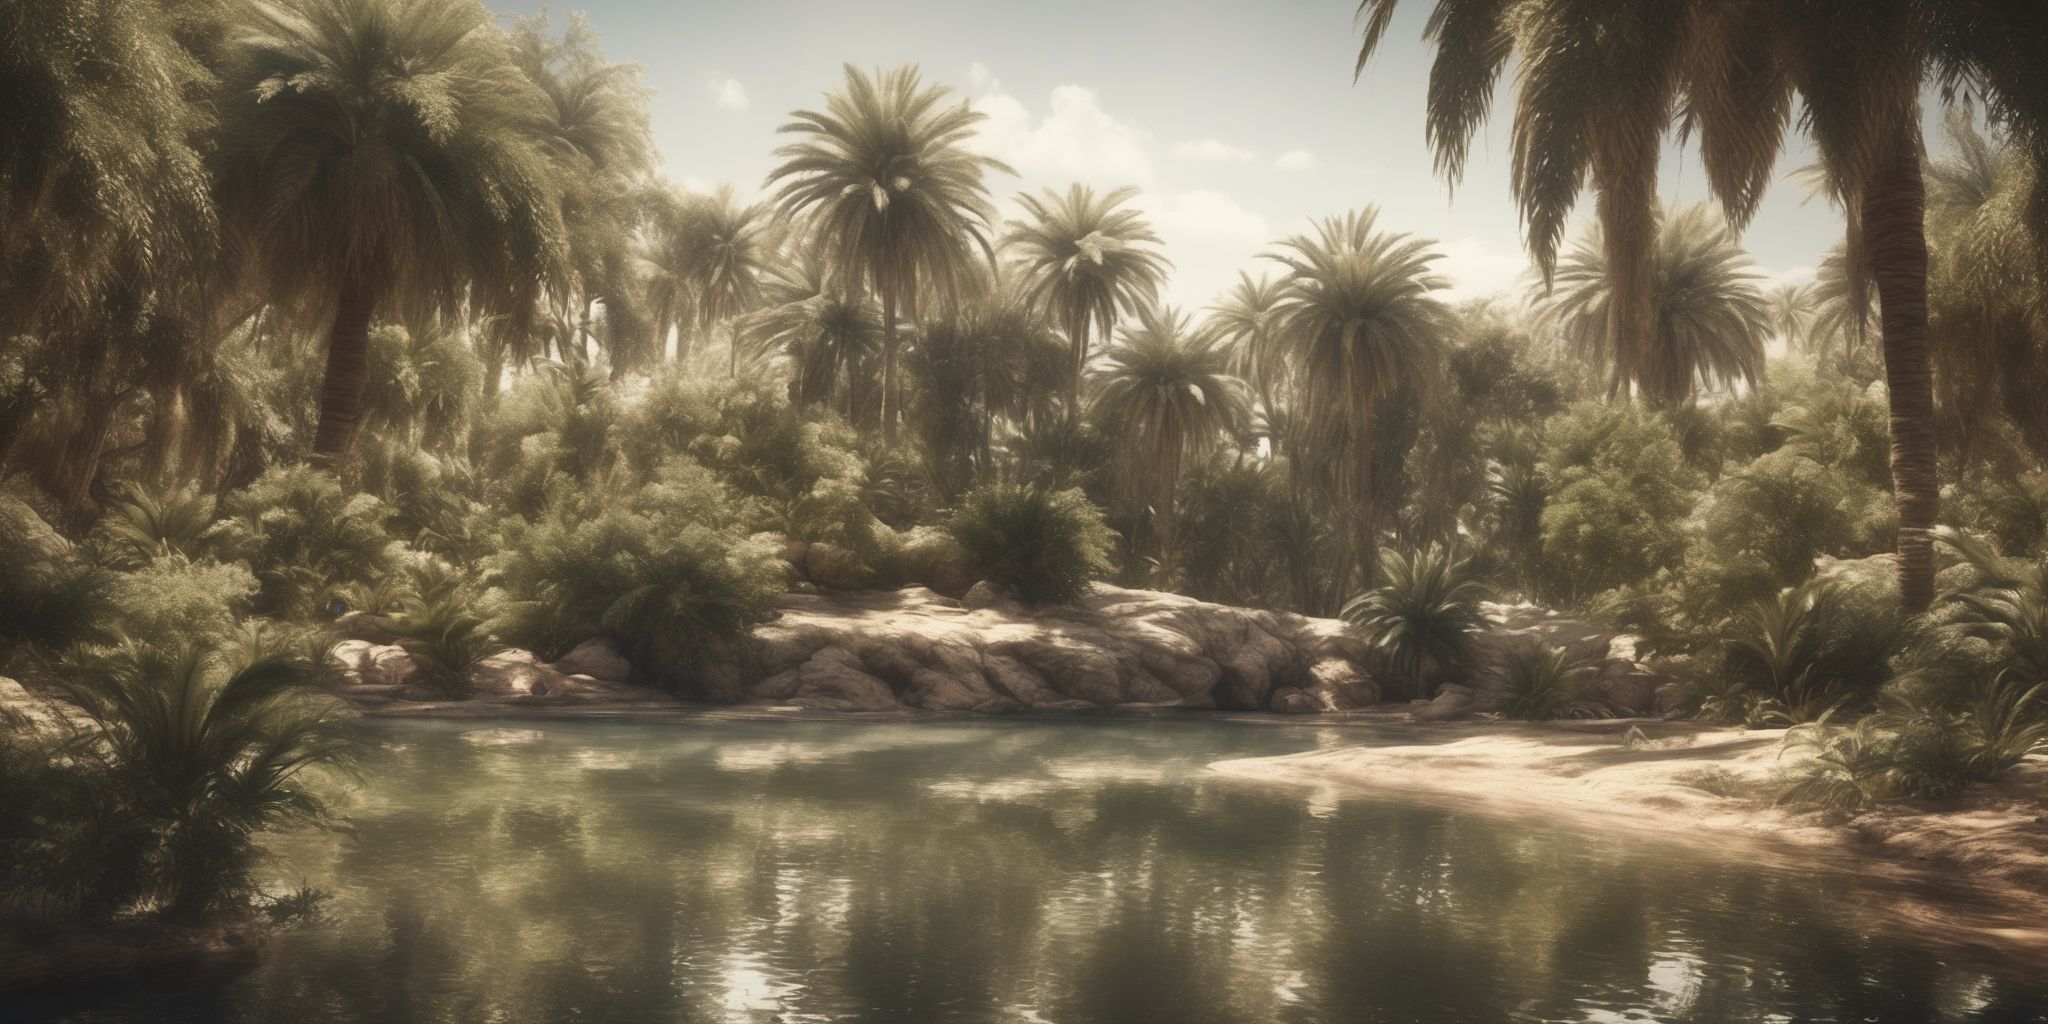 Oasis  in realistic, photographic style